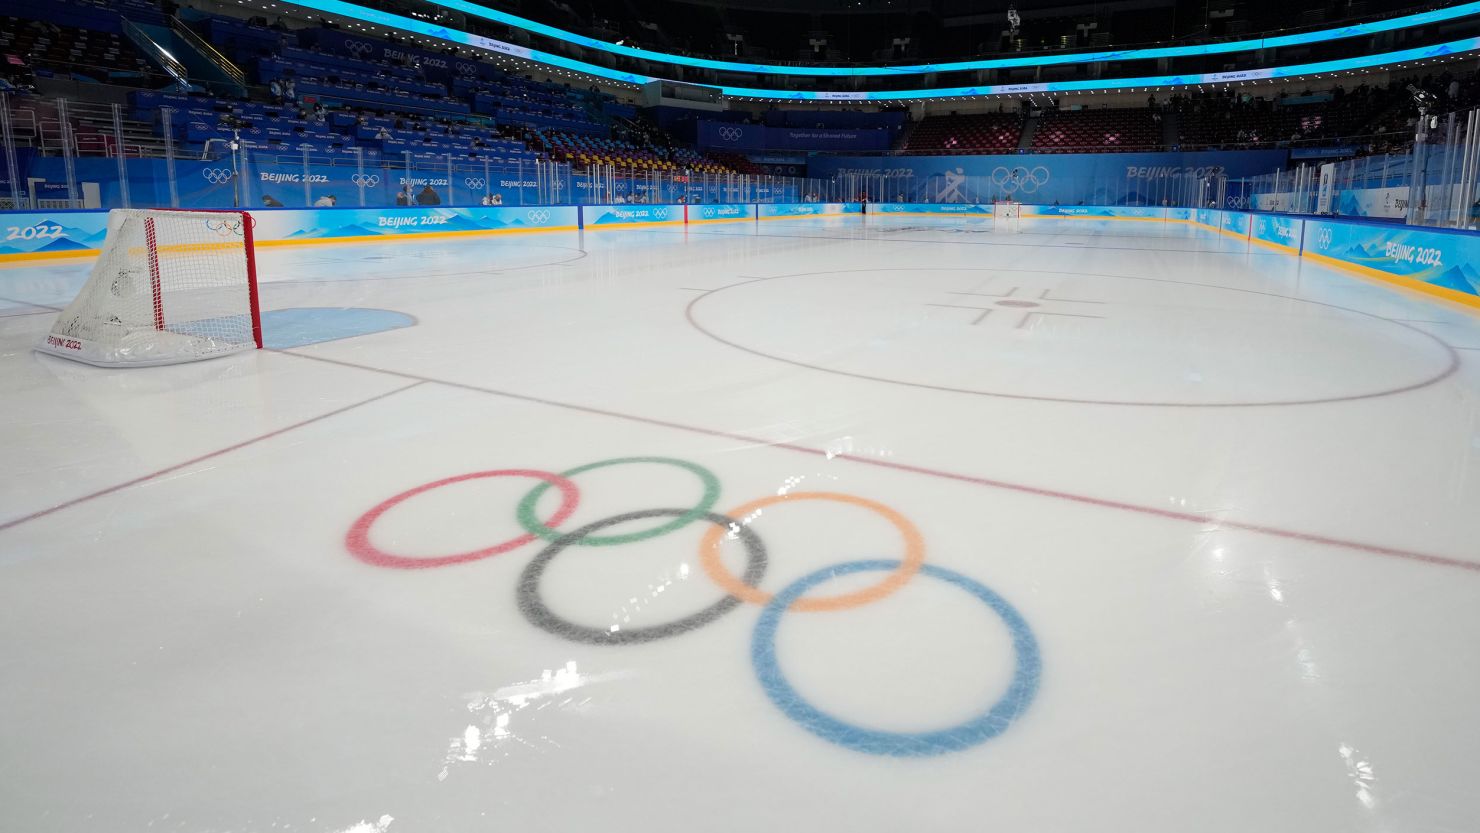 Players from the National Hockey League haven't participated in the Olympics since 2014, when they competed in Sochi, Russia.